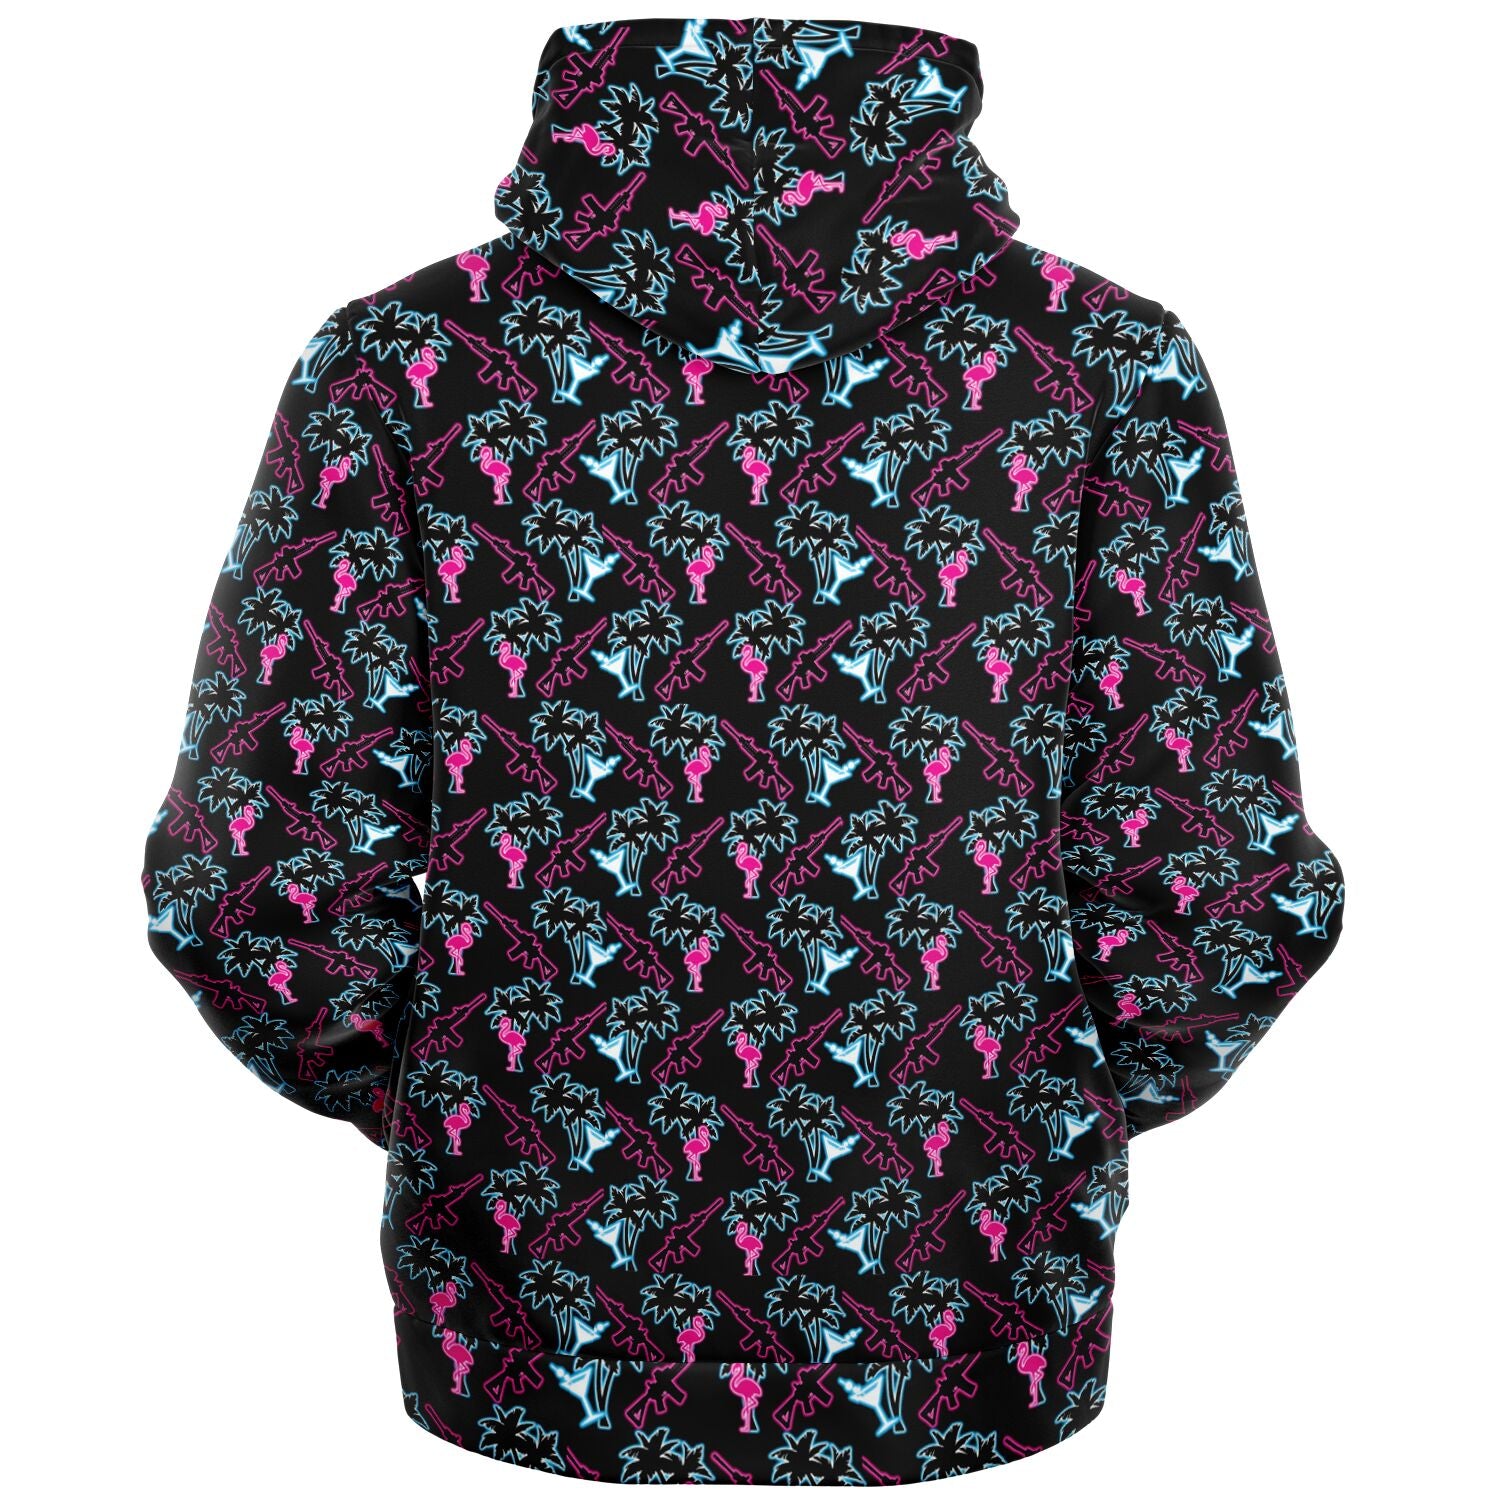 Rad Palm Neon Attack Fleece Lined Hoodie